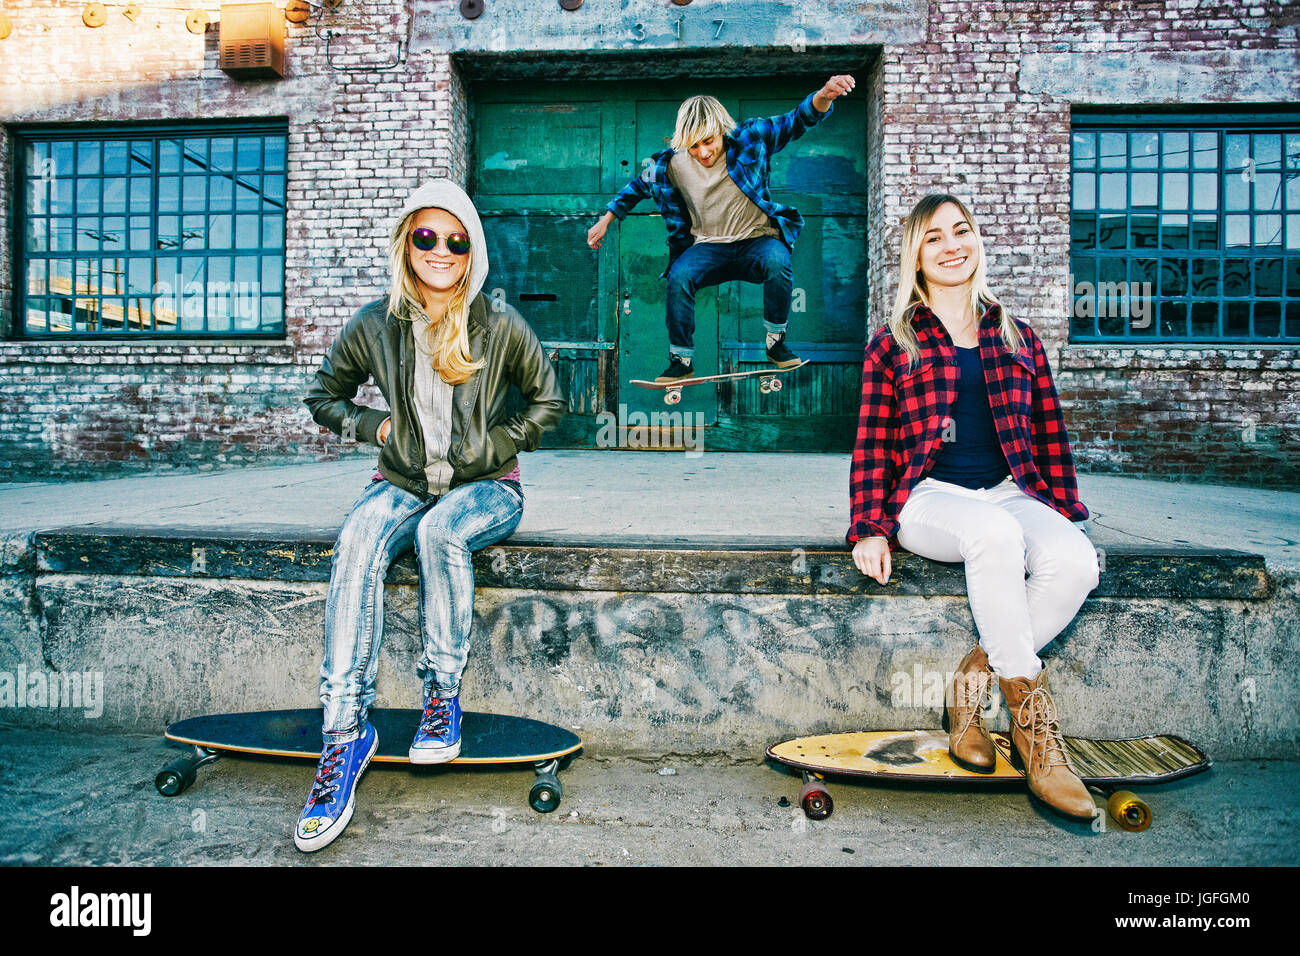 Friends with skateboards smiling on loading dock Stock Photo